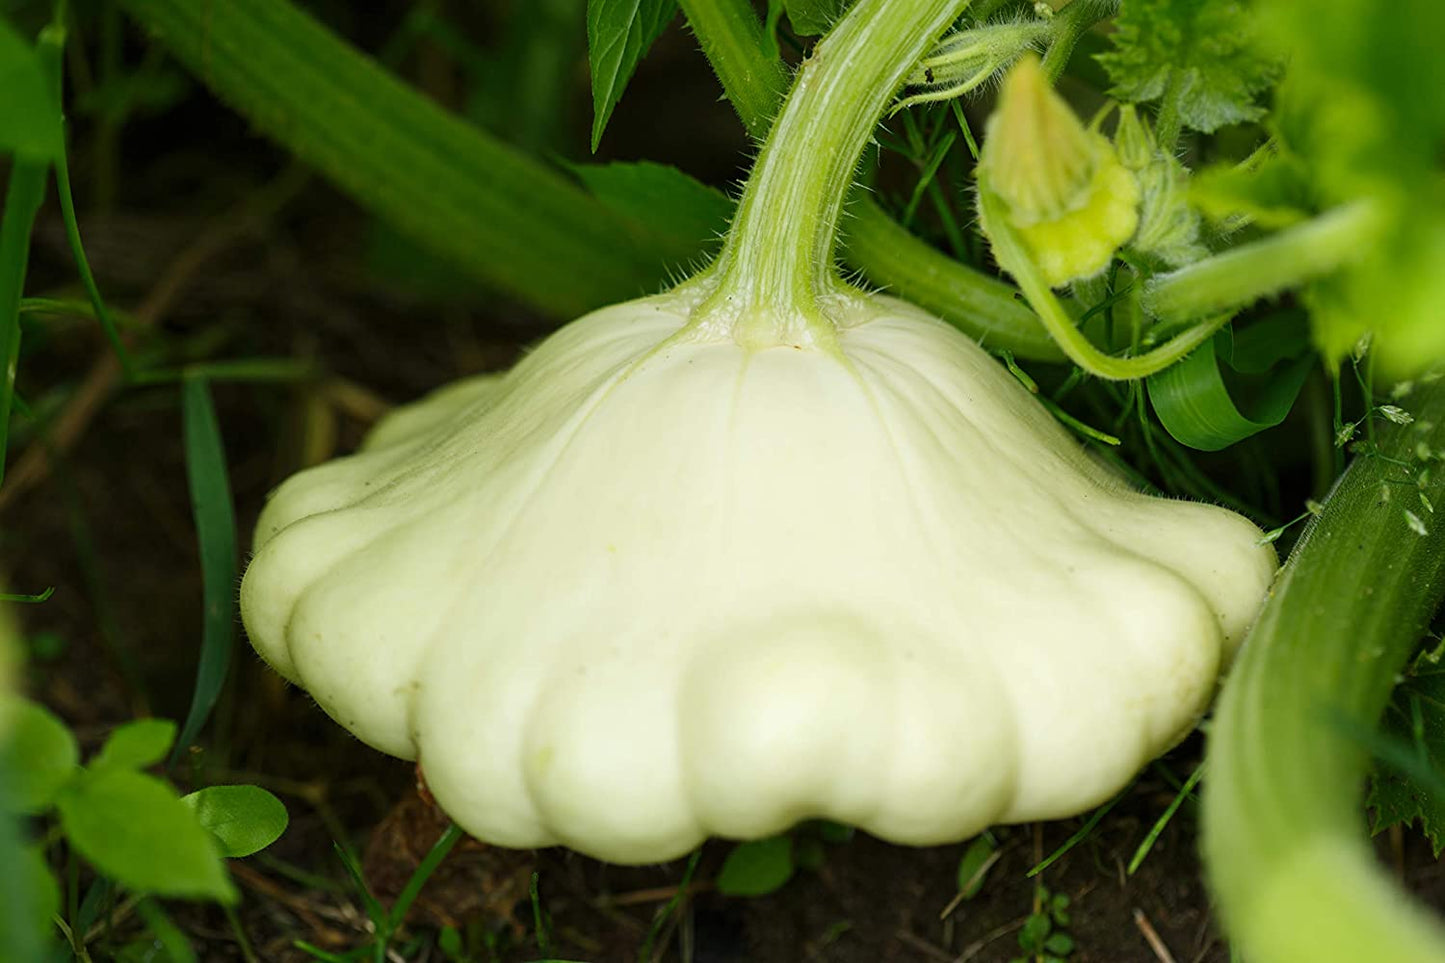 Early White Bush Scallop Summer Squash, 30 Heirloom Seeds Per Packet, Non GMO Seeds